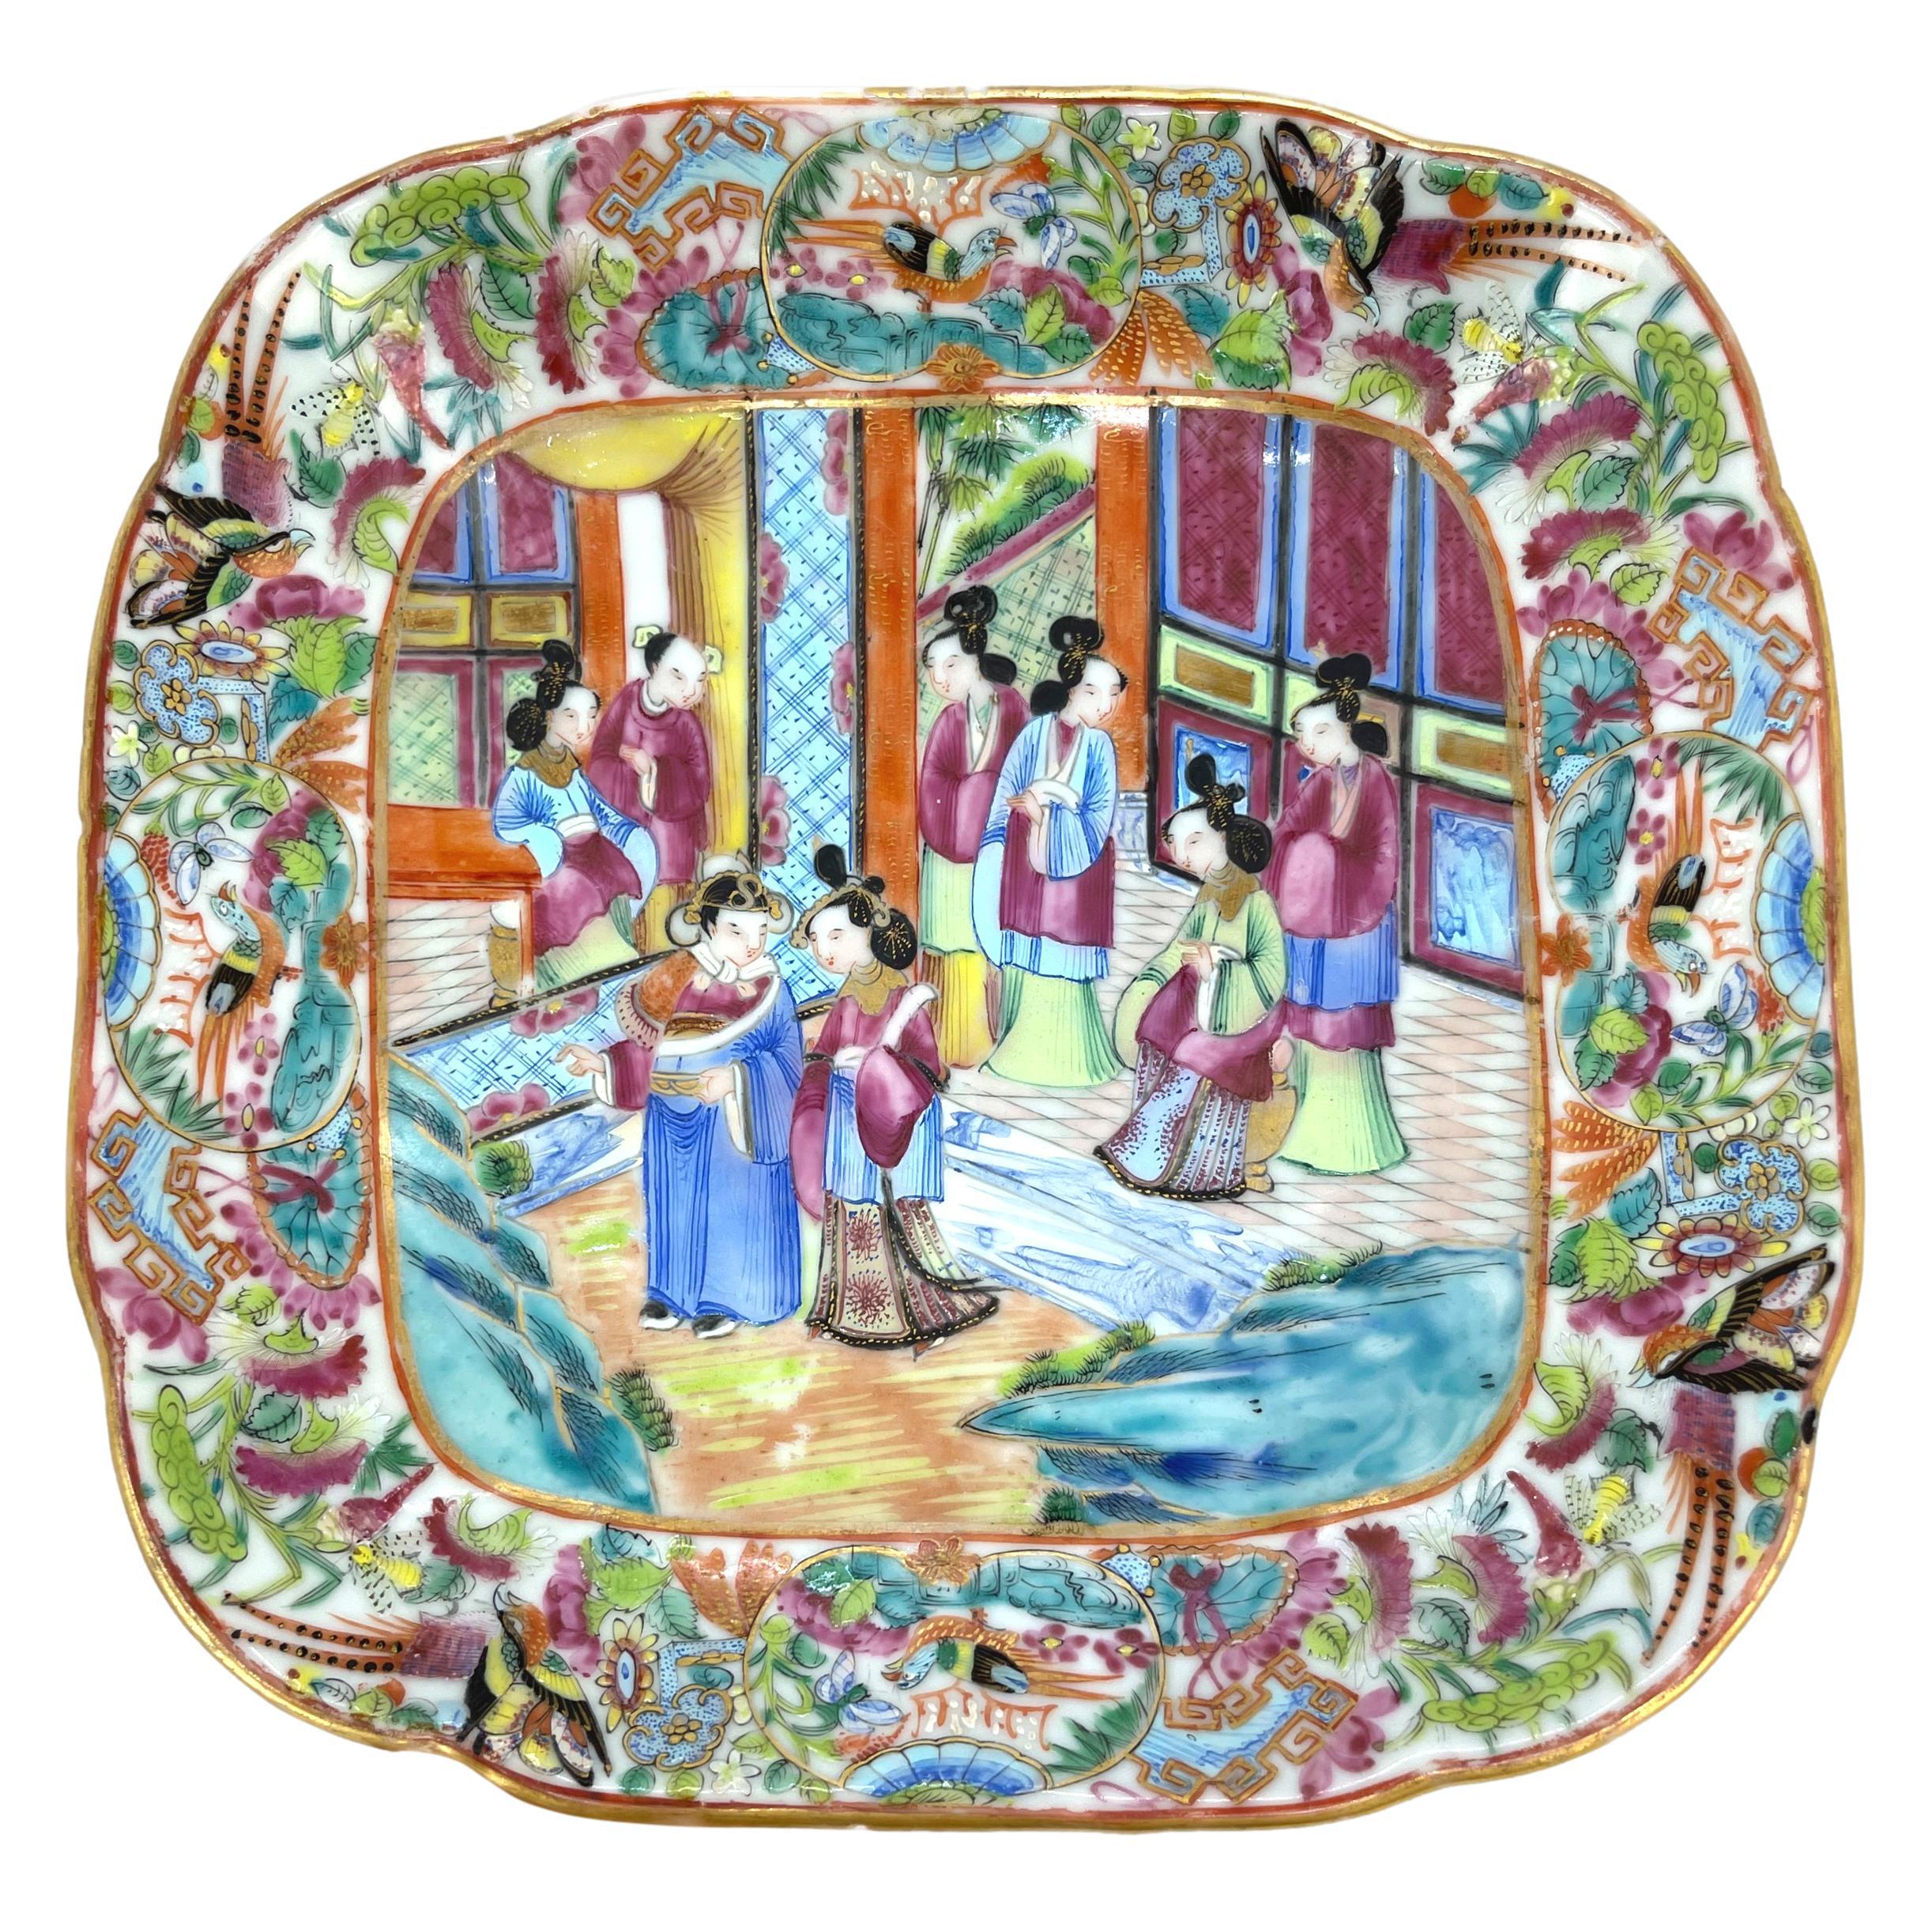 Chinese Export Porcelain Canton Famille Rose Square Dish, ca. 1820.